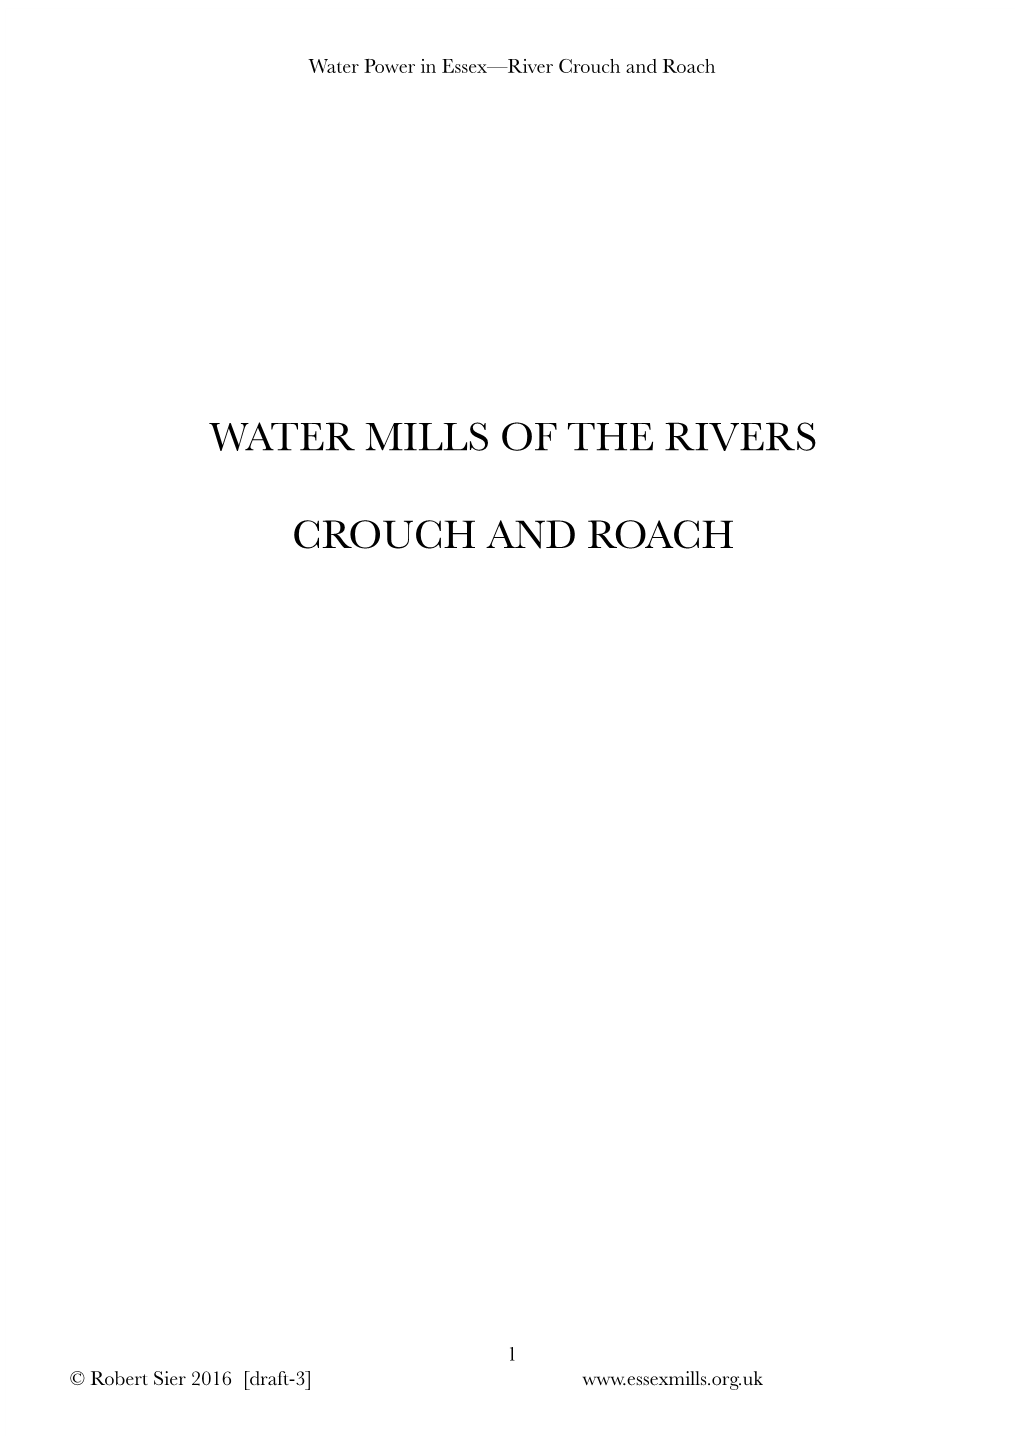 Water Mills of the Rivers Crouch and Roach